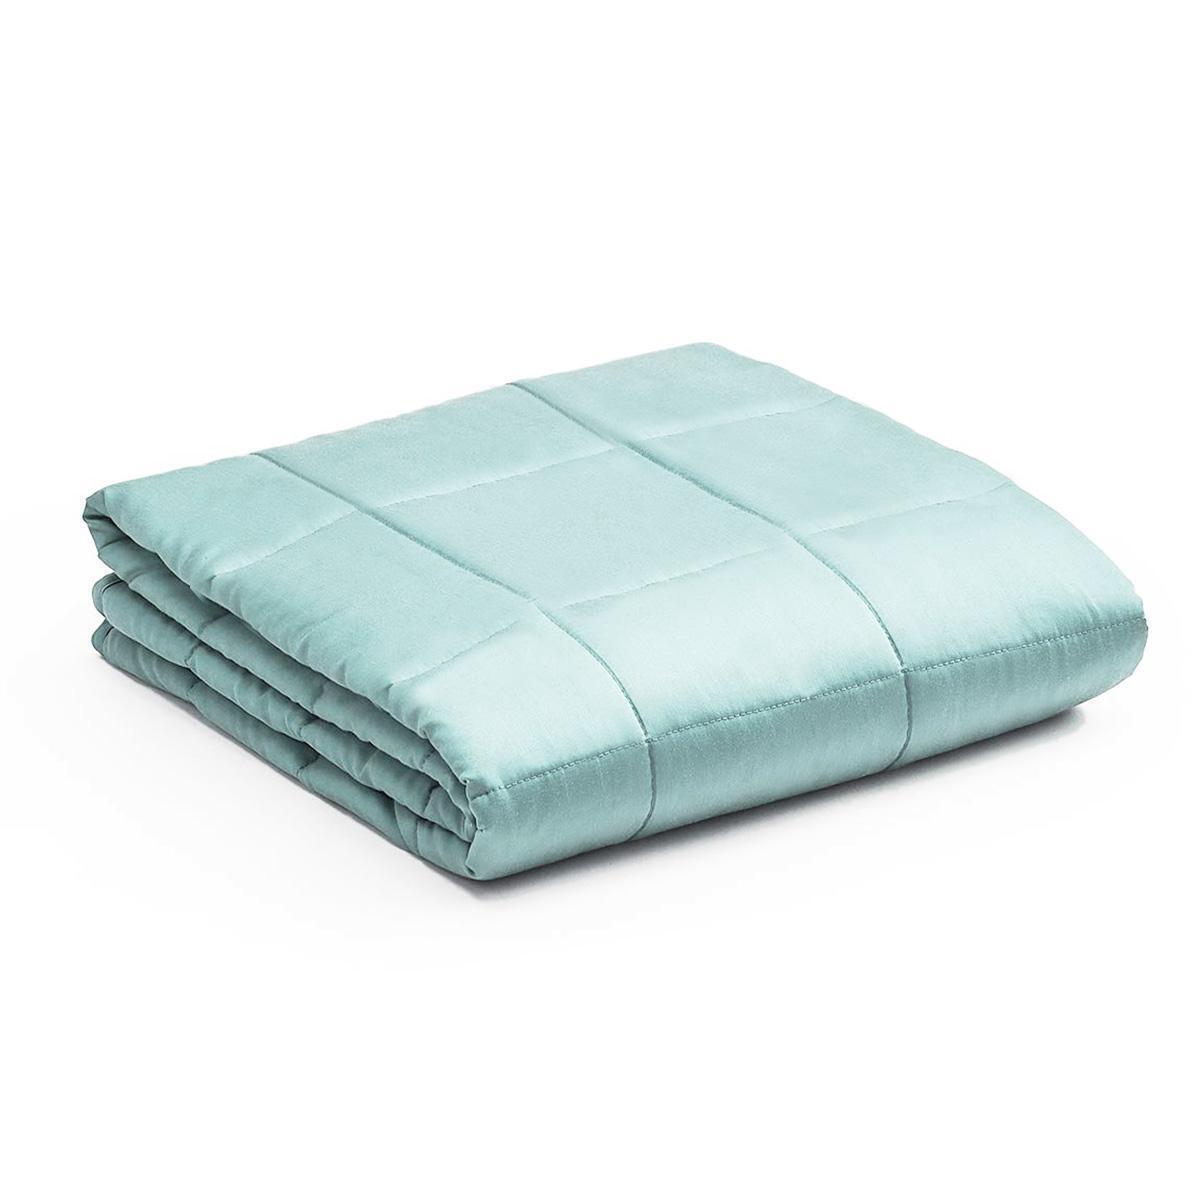 Costway 15lbs Premium Cooling Heavy Weighted Blanket Soft Fabric Breathable 60'' x 80''